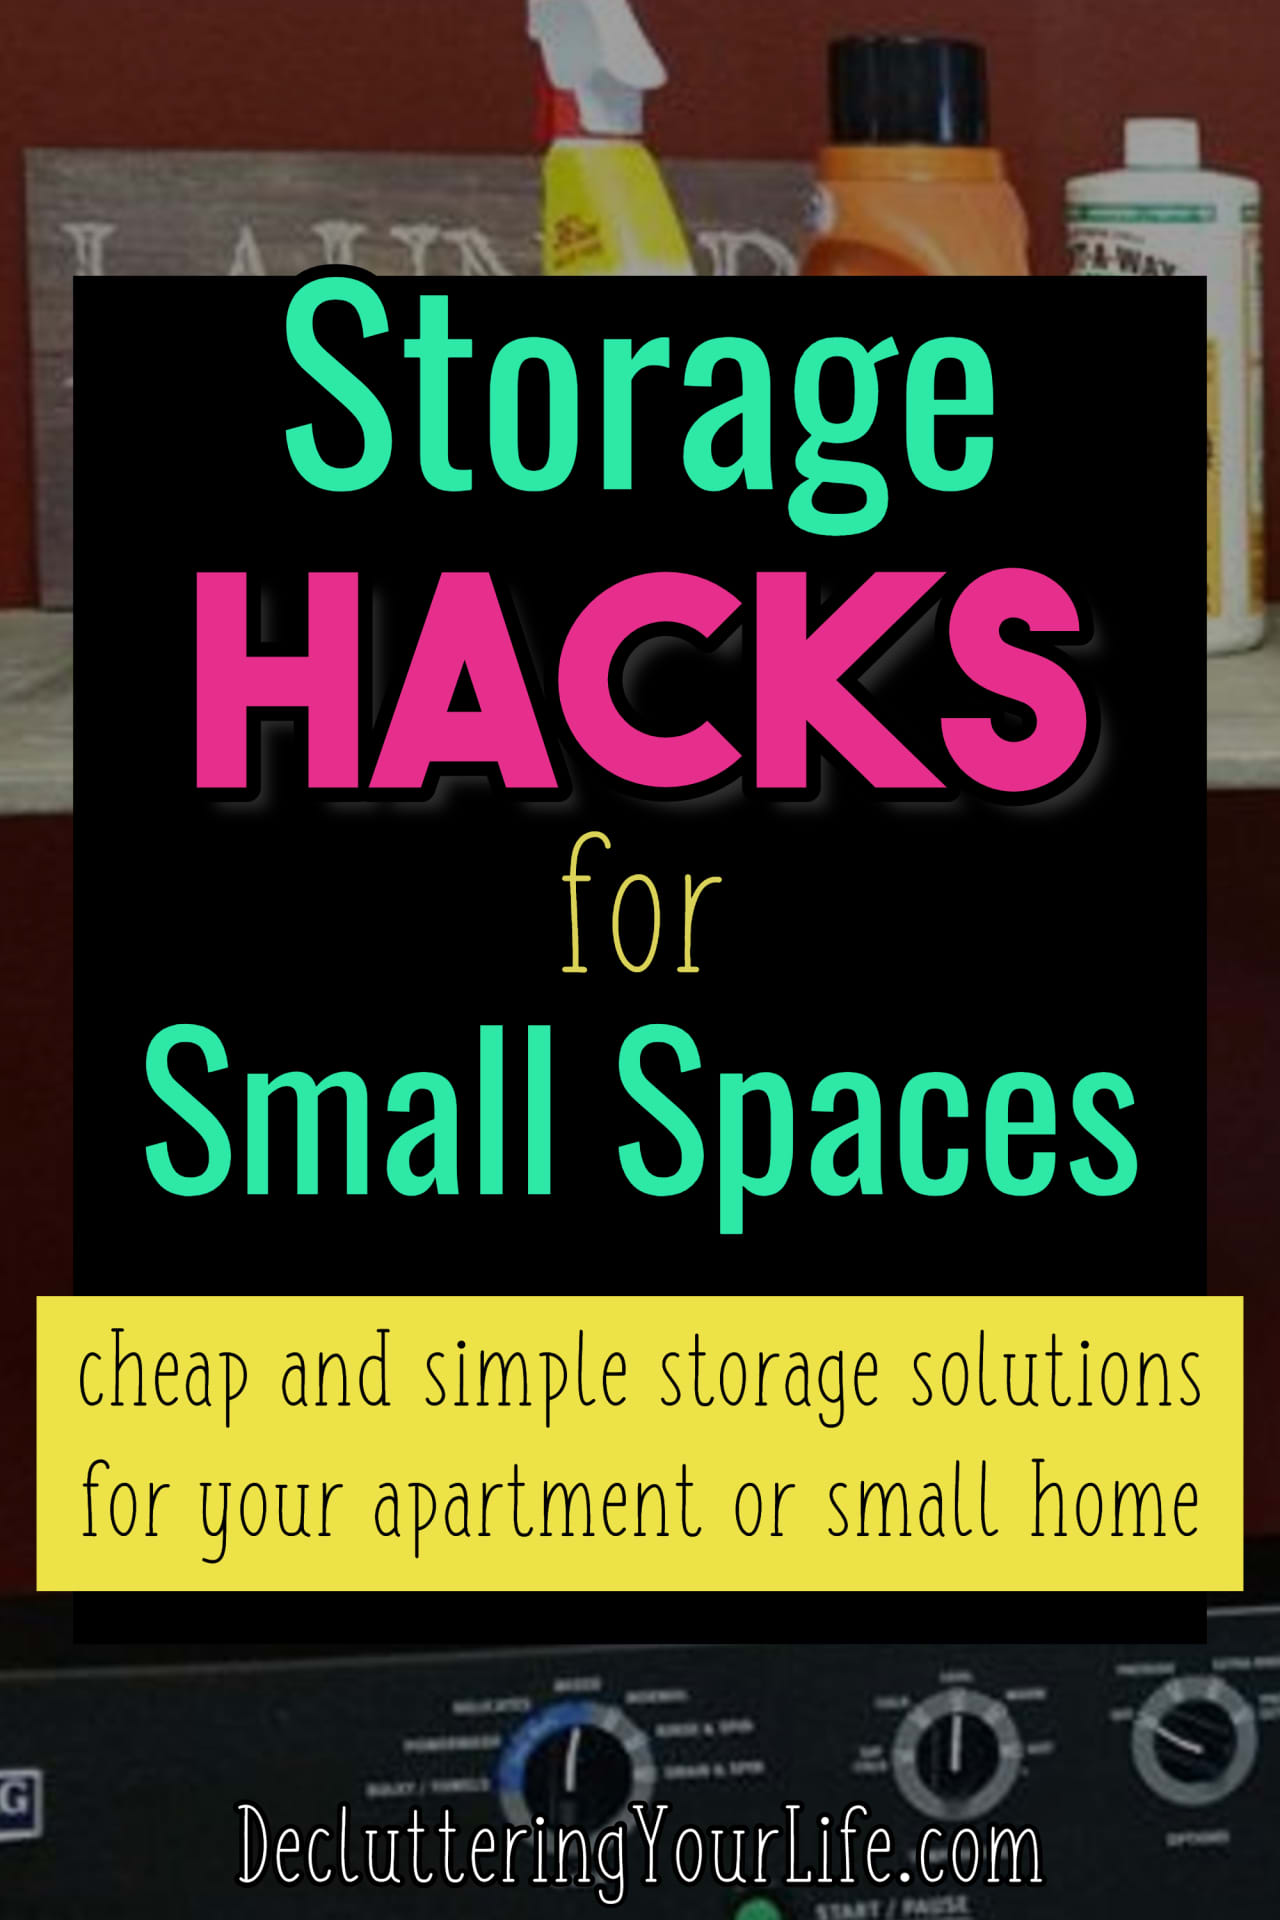 Storage and Organization Hacks That Really Work To Organize Your Clutter When You Live in a Small Home, Apartment, Dorm Room, or Condo.  These DIY organization and storage solutions are perfect for organizing on a budget - LOTS of pictures for inspiration to get organized and stay organized.  Ready to declutter your life in your small space?  Try these tips and tricks and organize your life...